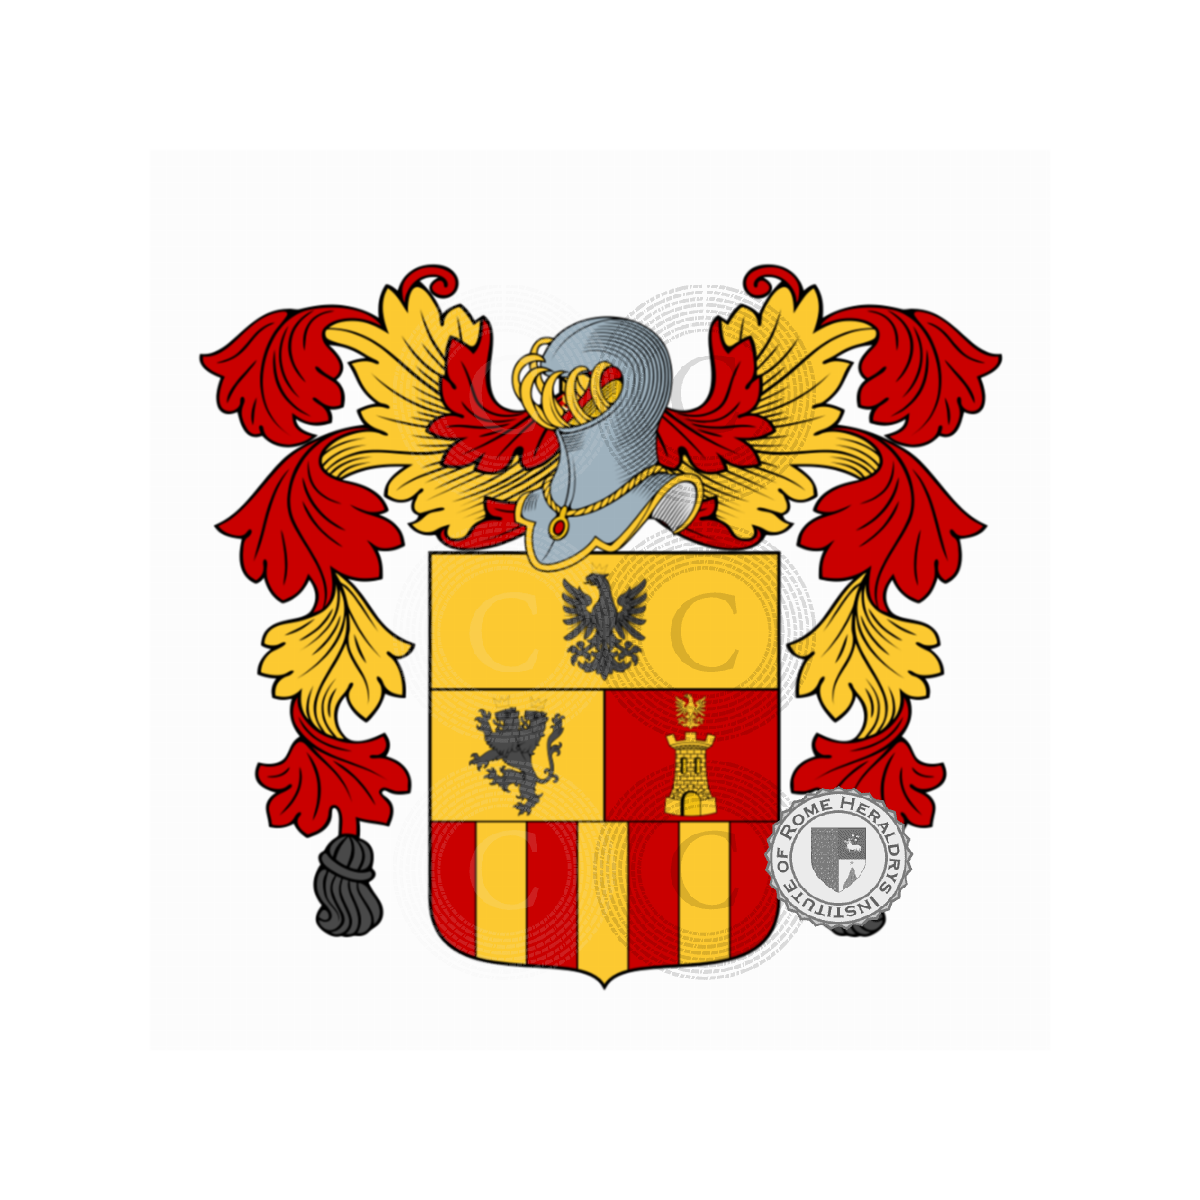 Coat of arms of familyCurti